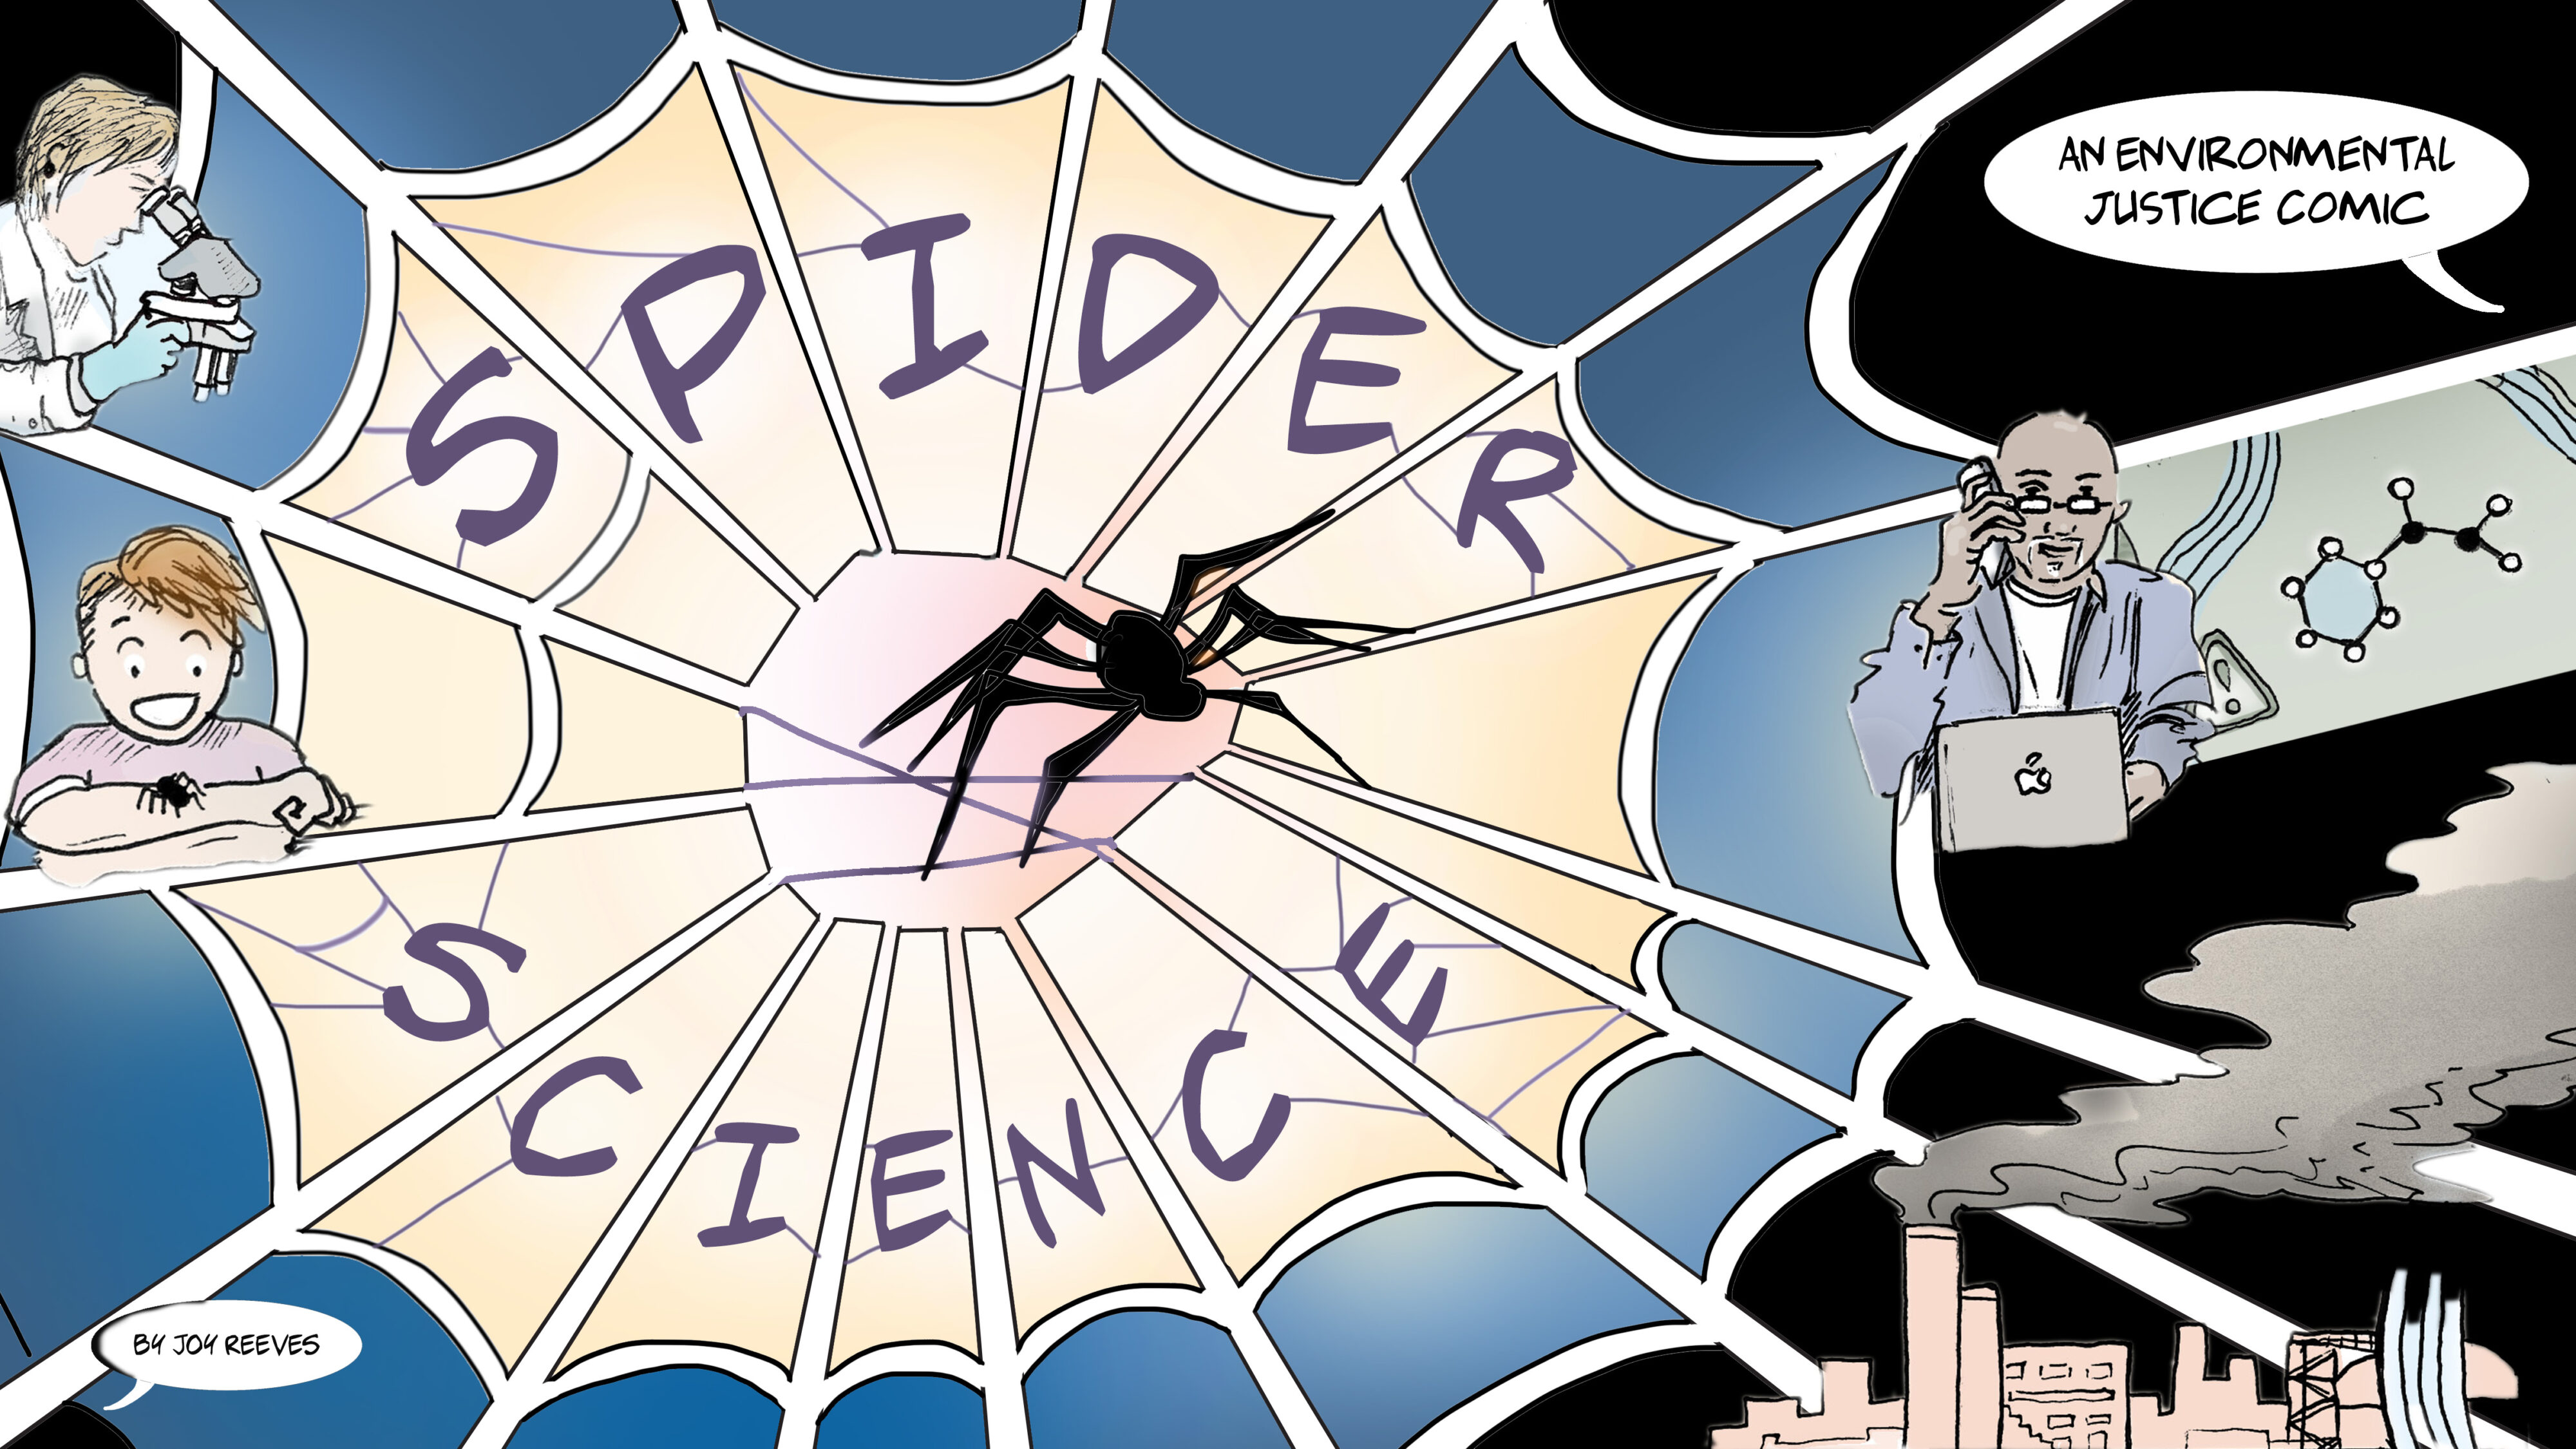 Your friendly neighborhood spider-party:  Community scientists use spider webs to monitor air pollution